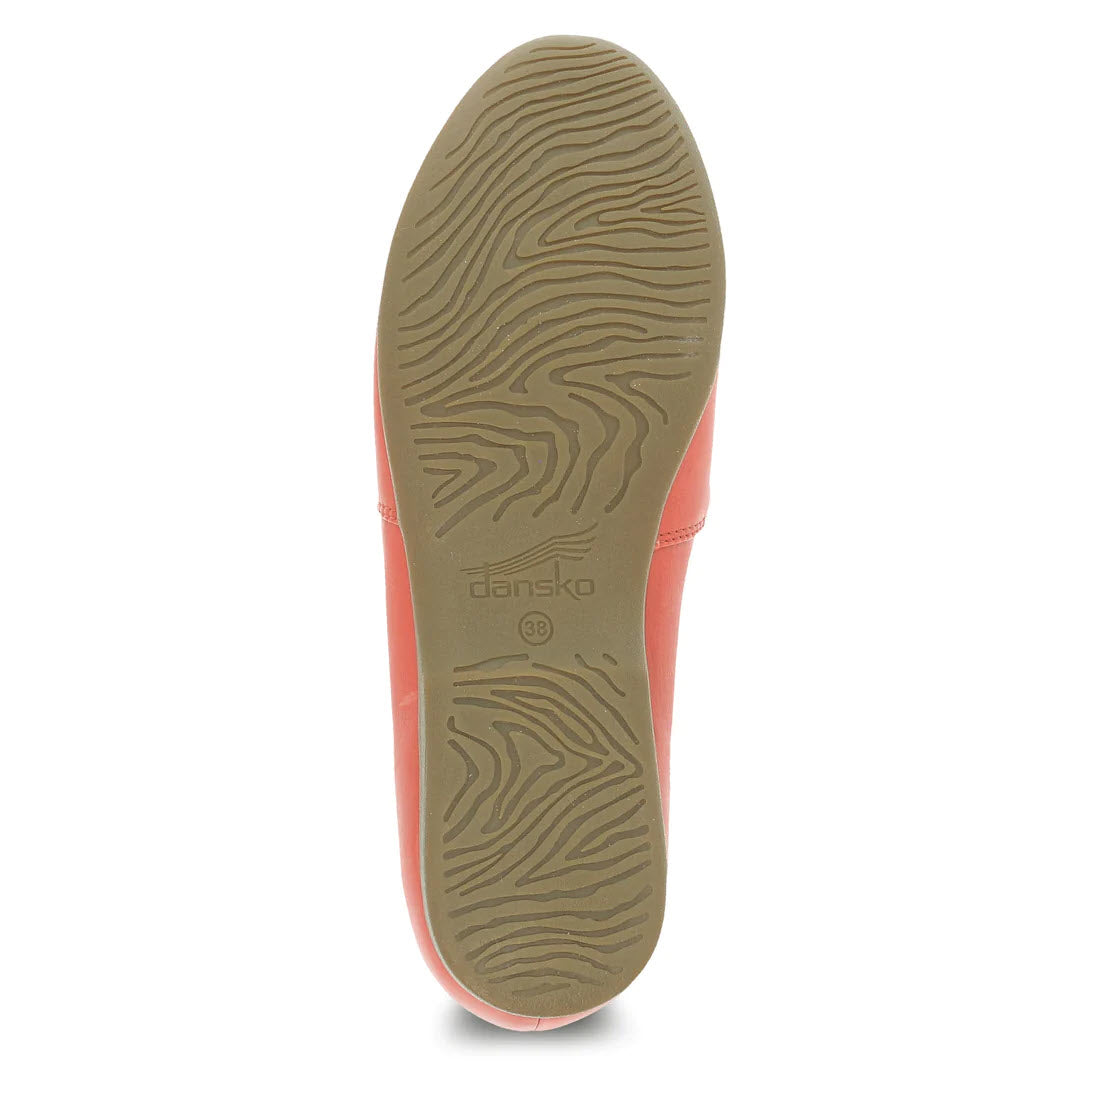 Sole of a shoe displaying Dansko Natural Arch technology tread pattern and Dansko brand logo.